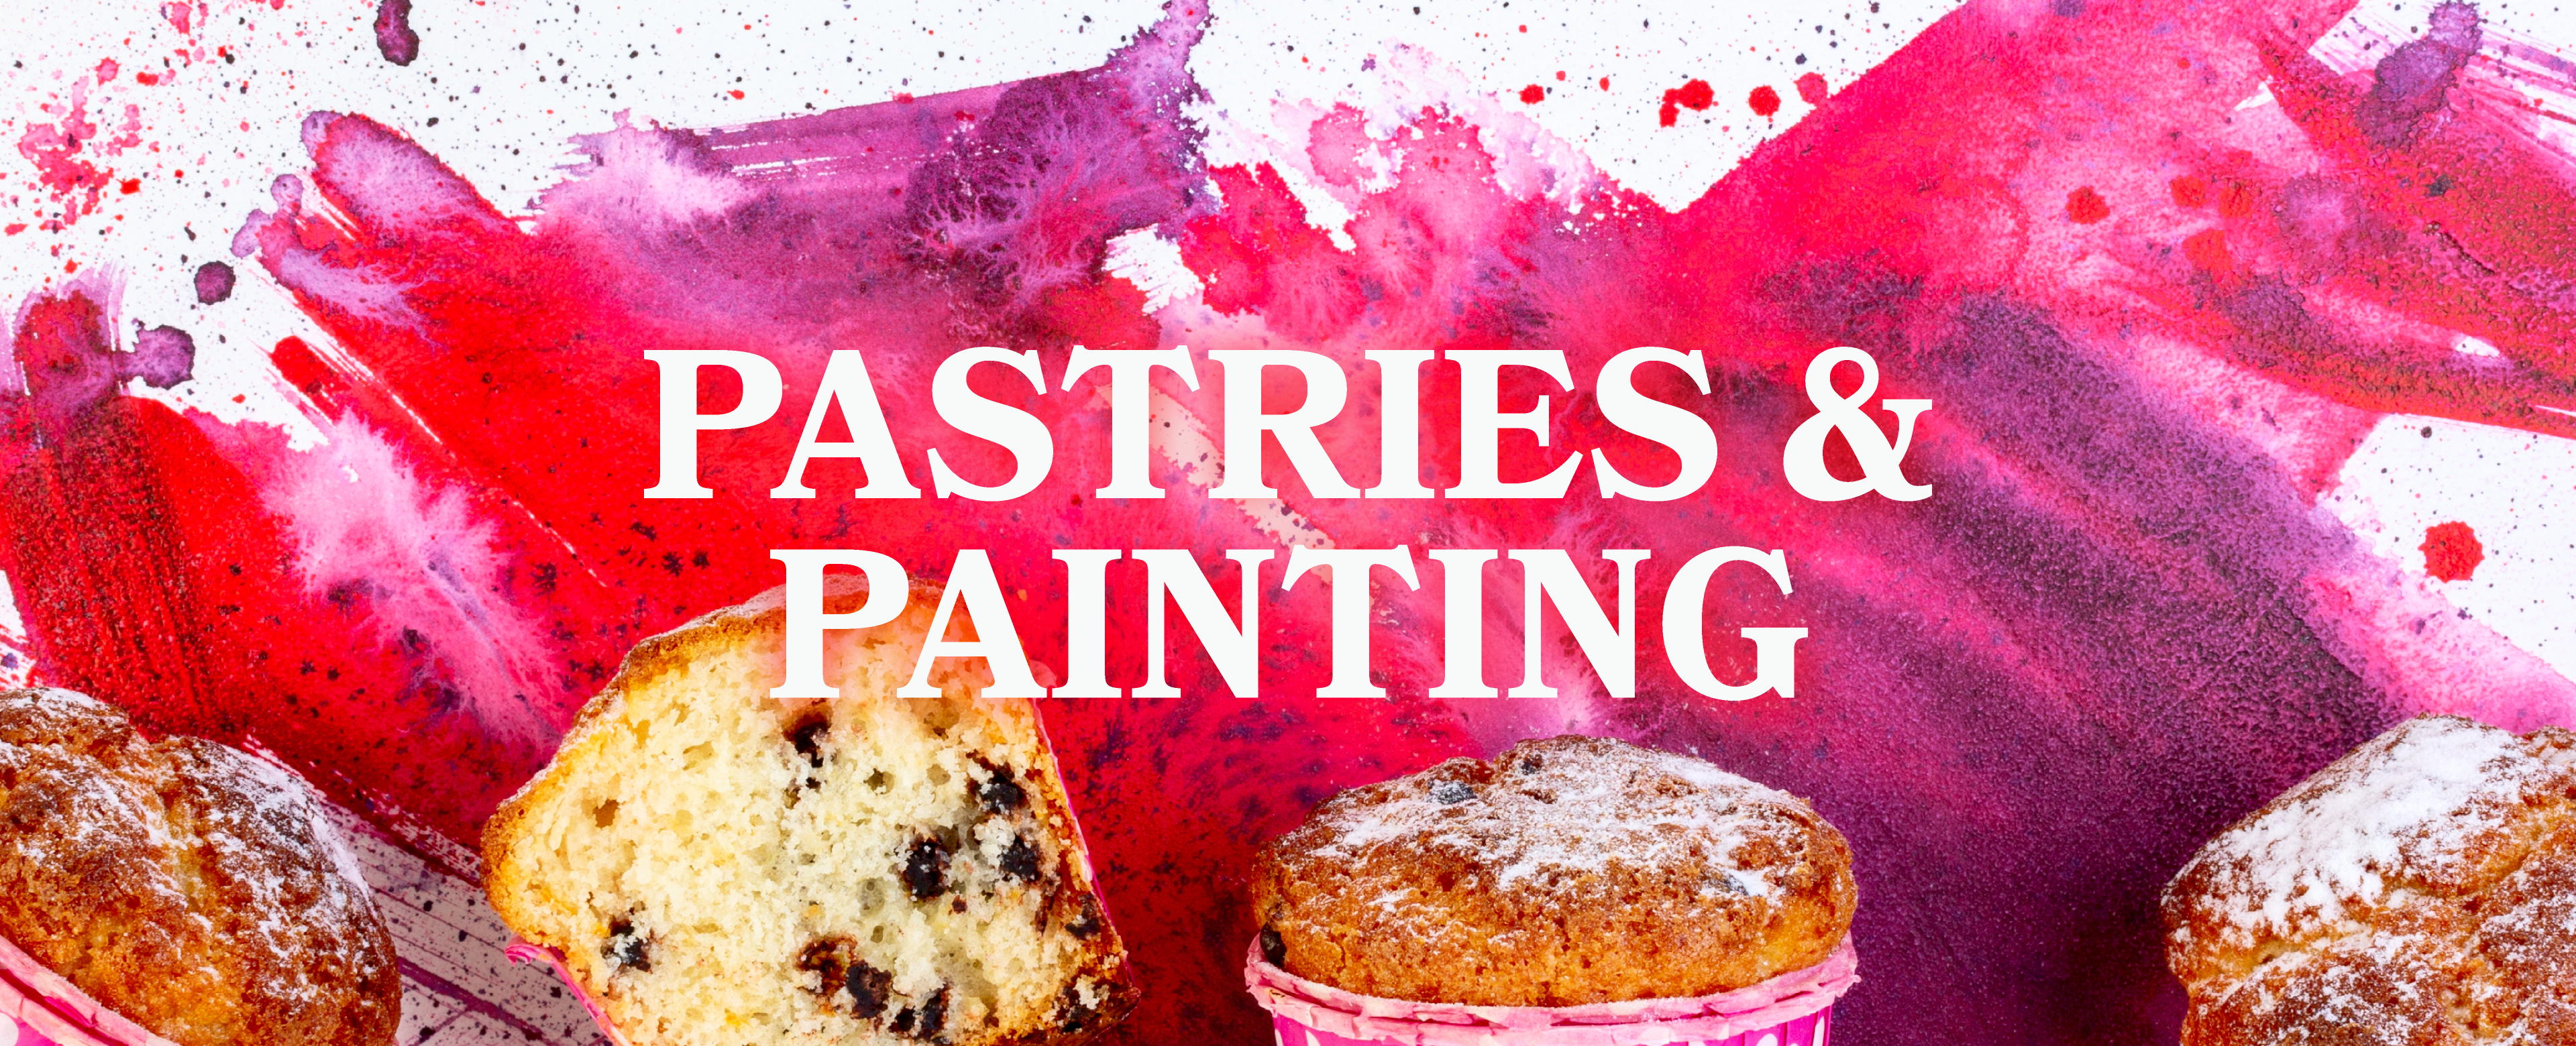 Pastries & Painting